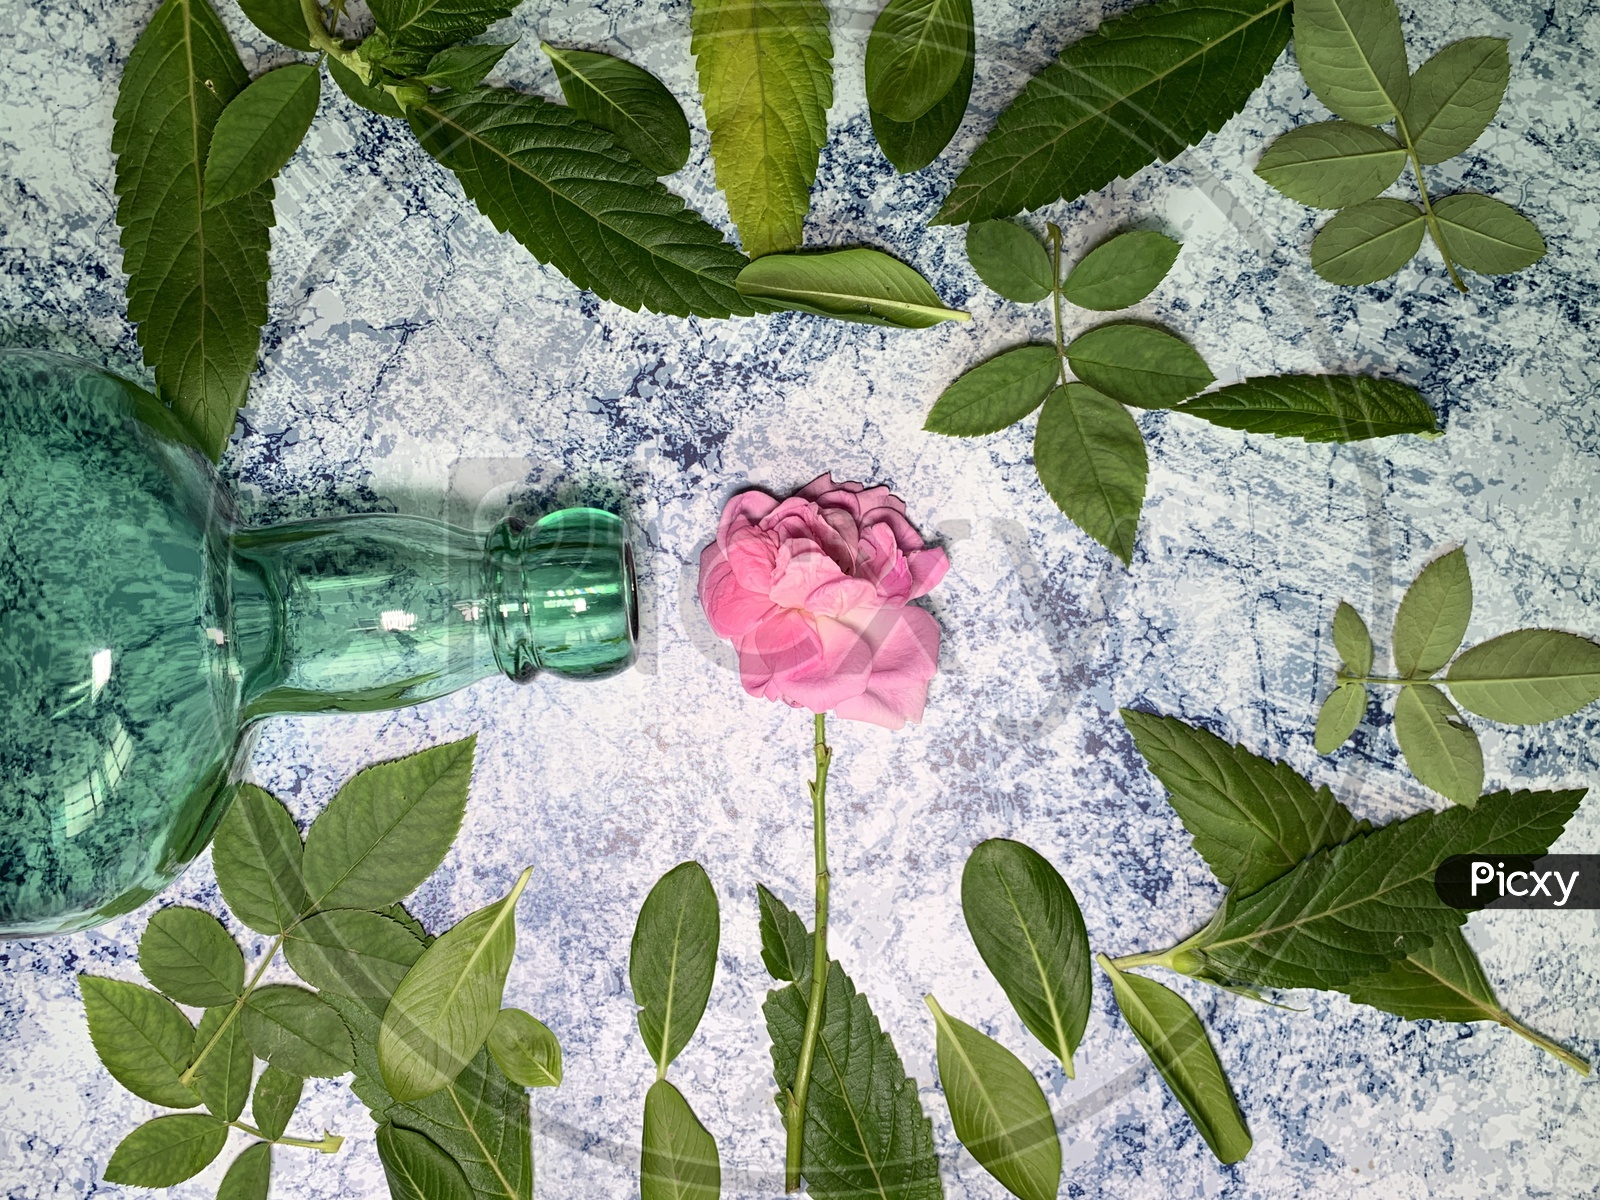 Rose, some leafs and a bottle on the flat textured background